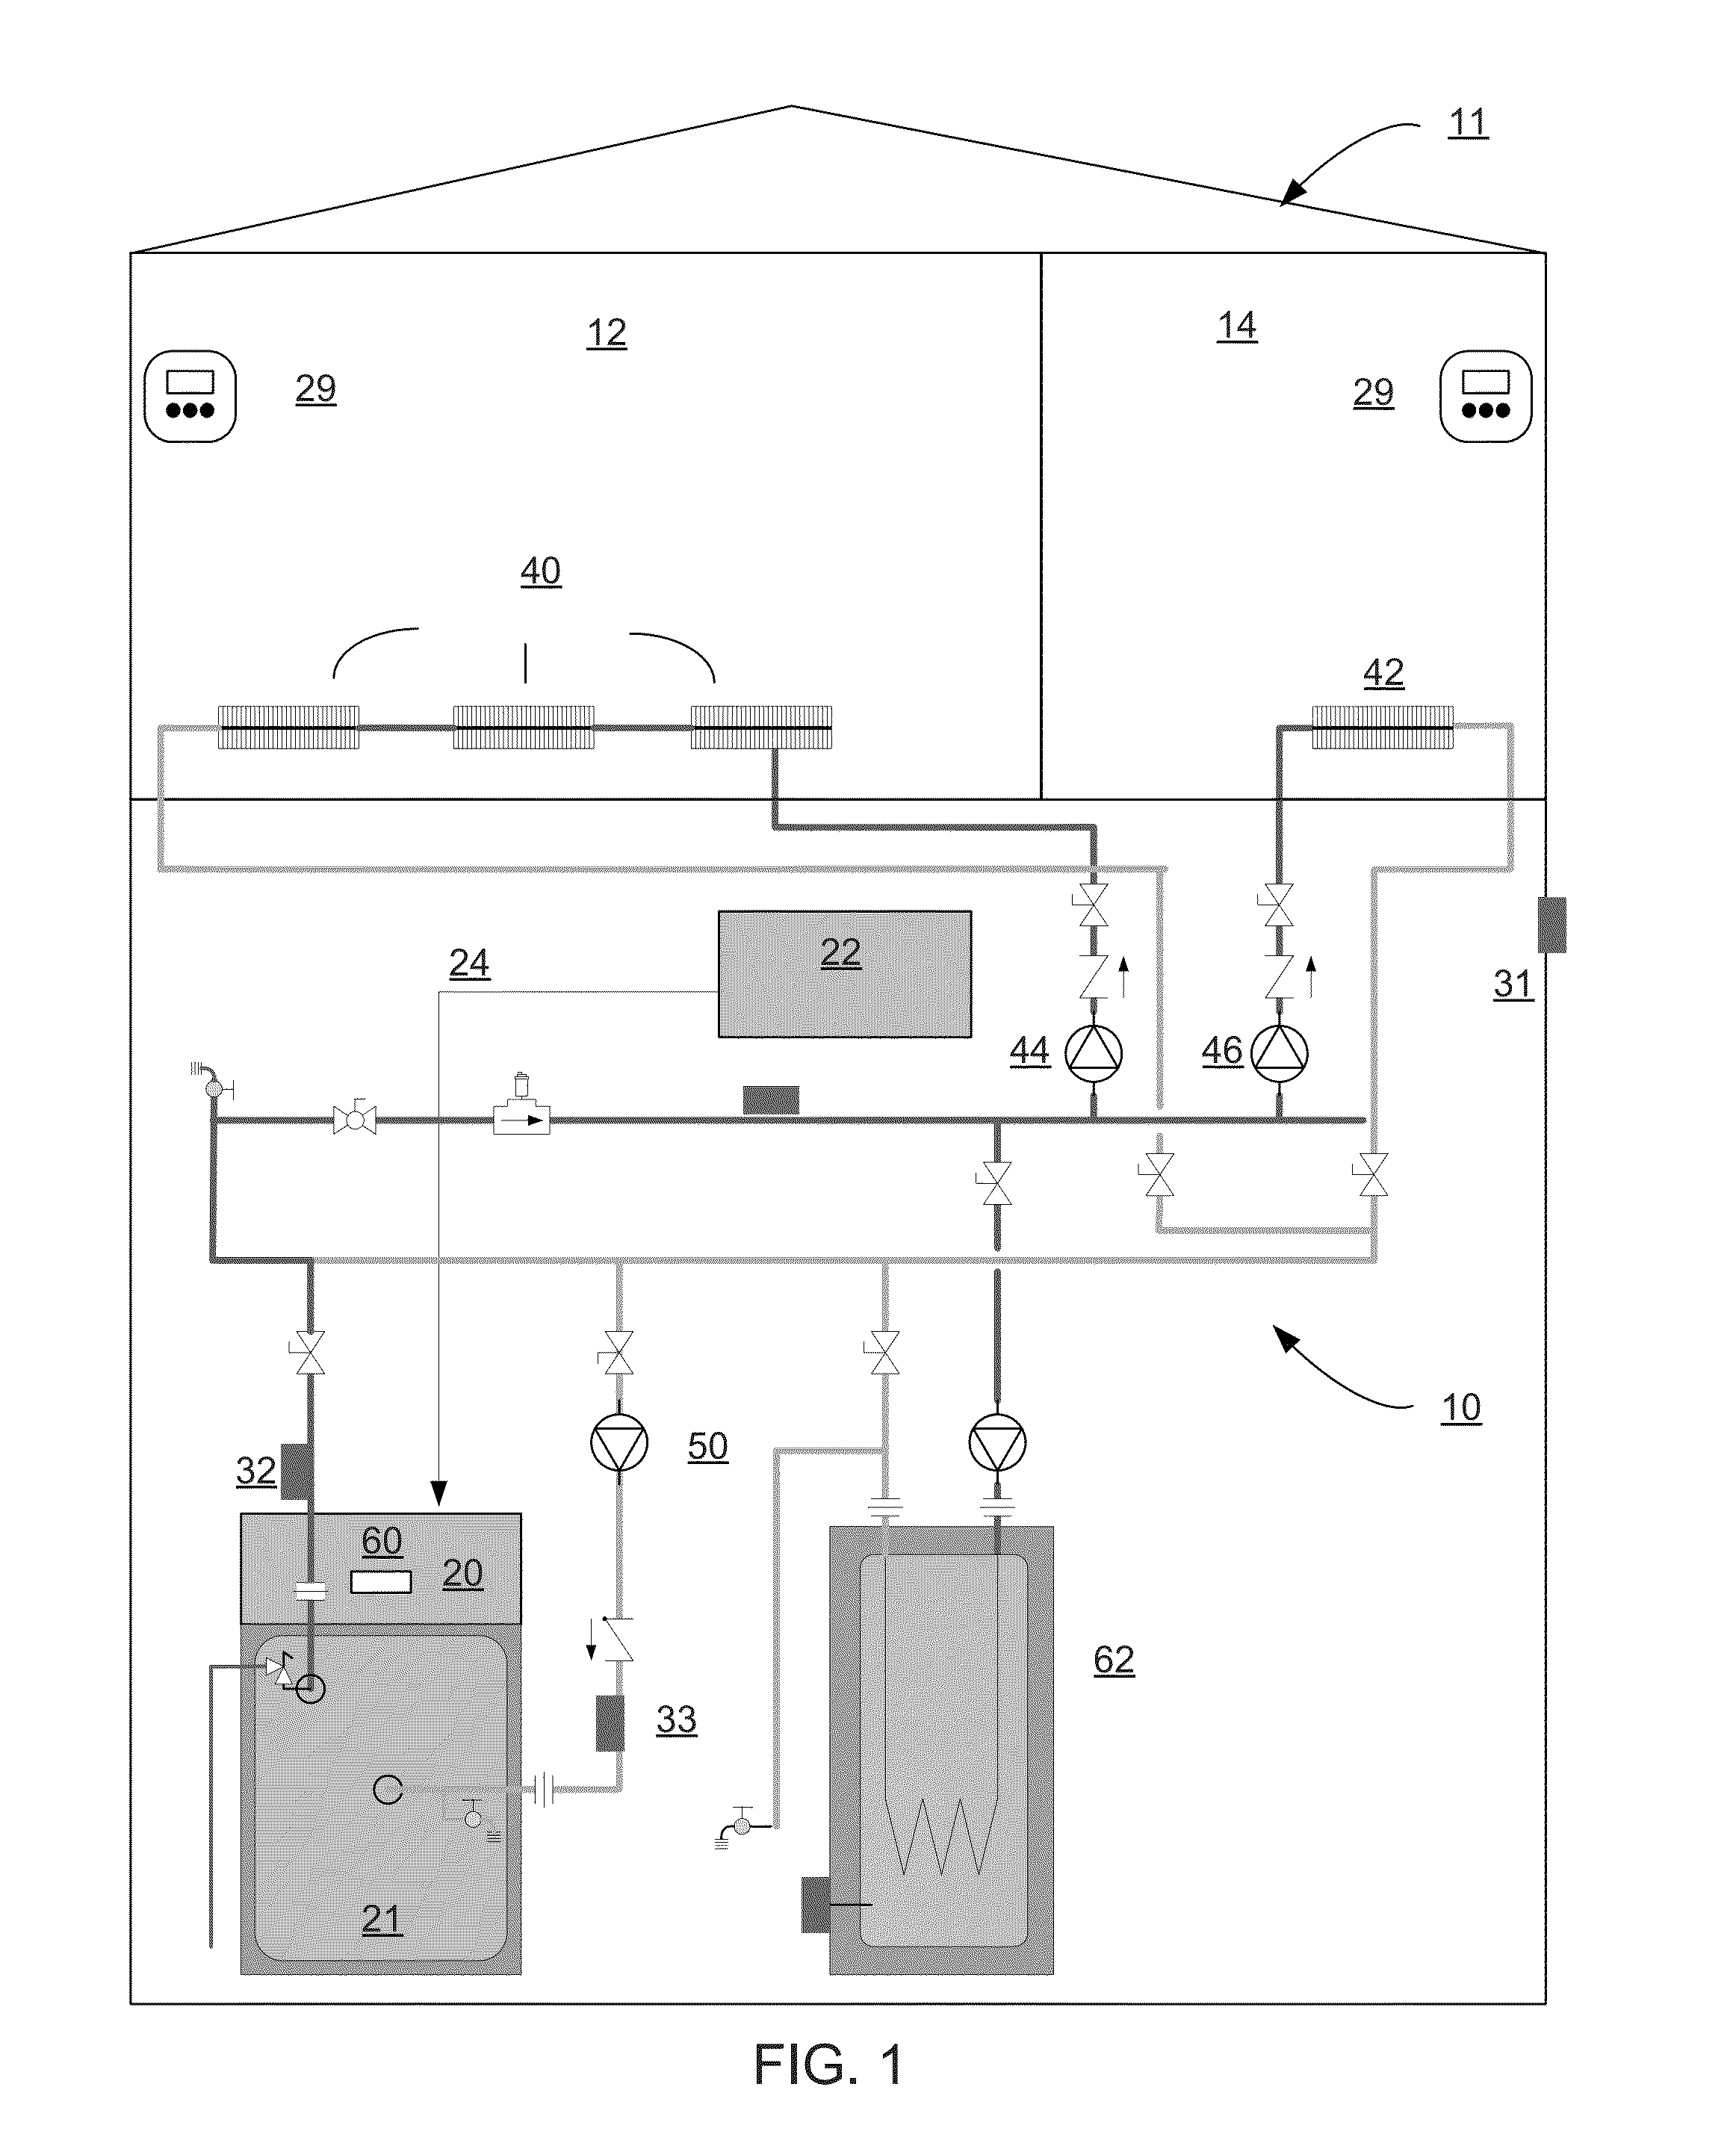 Multiple zone control system and method of operation